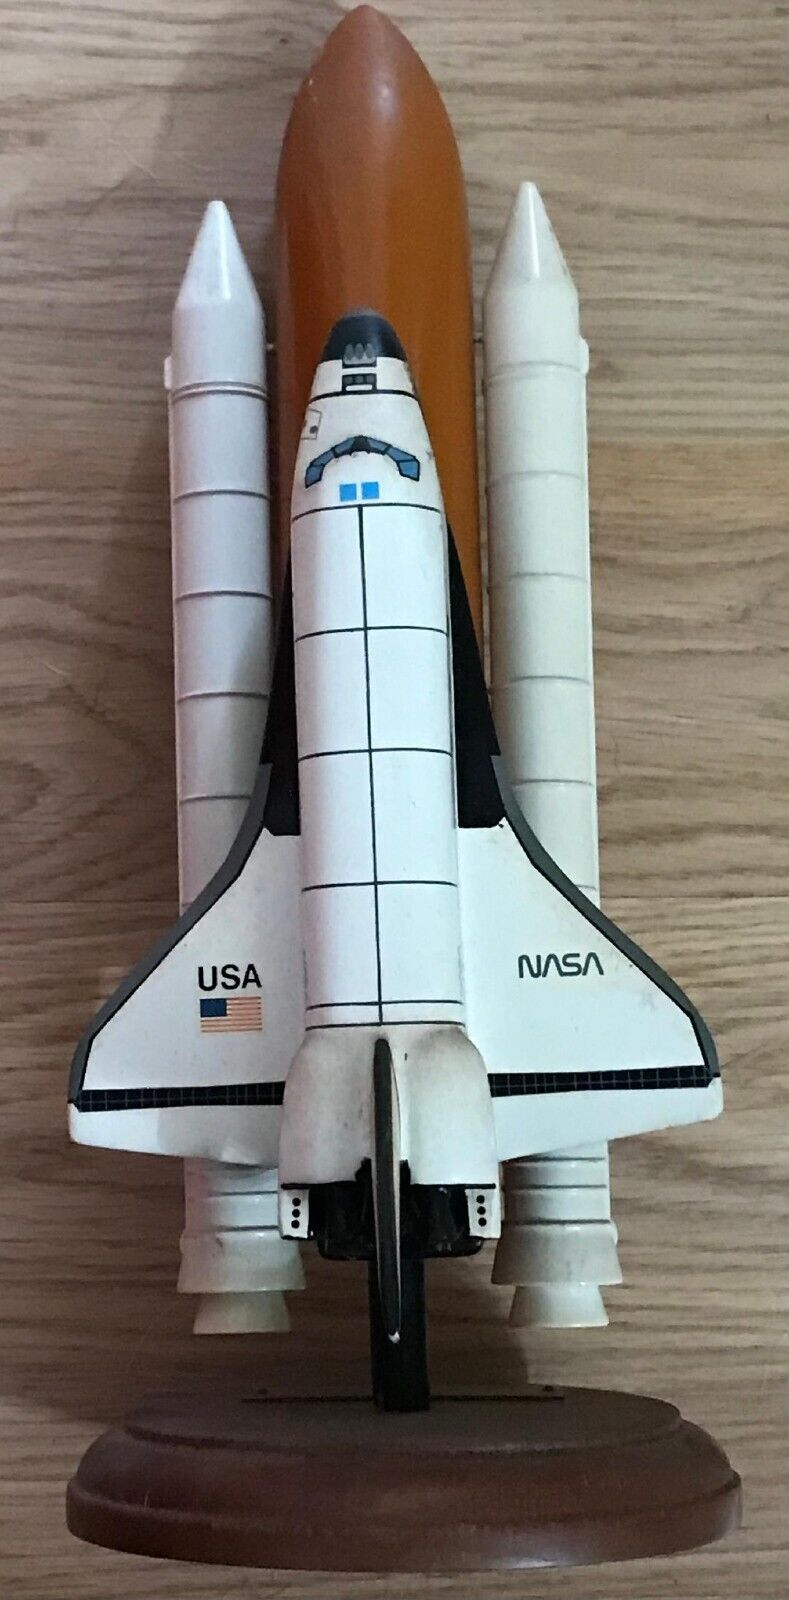 1989 NASA Space Shuttle Presentation Model 1/200 Scale/Langley Research Center